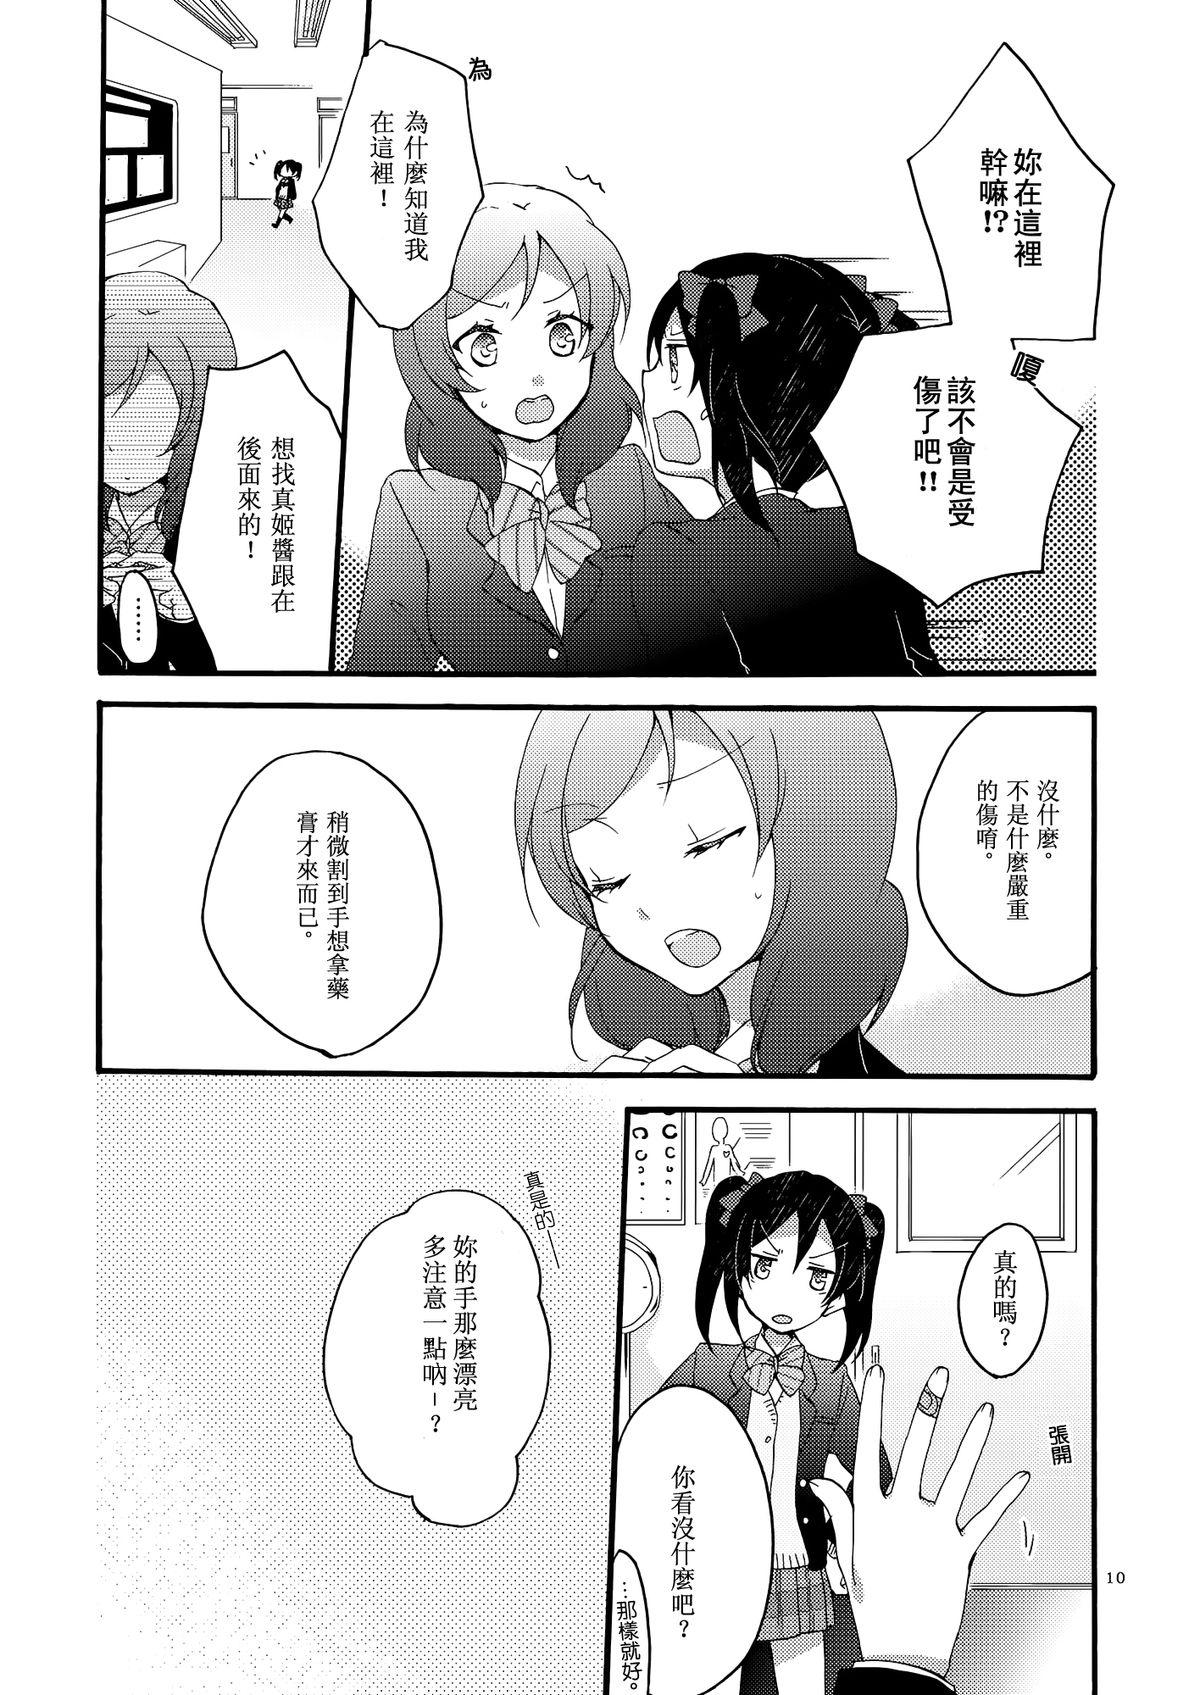 Polla Lovesick Girl - Love live Interacial - Page 9